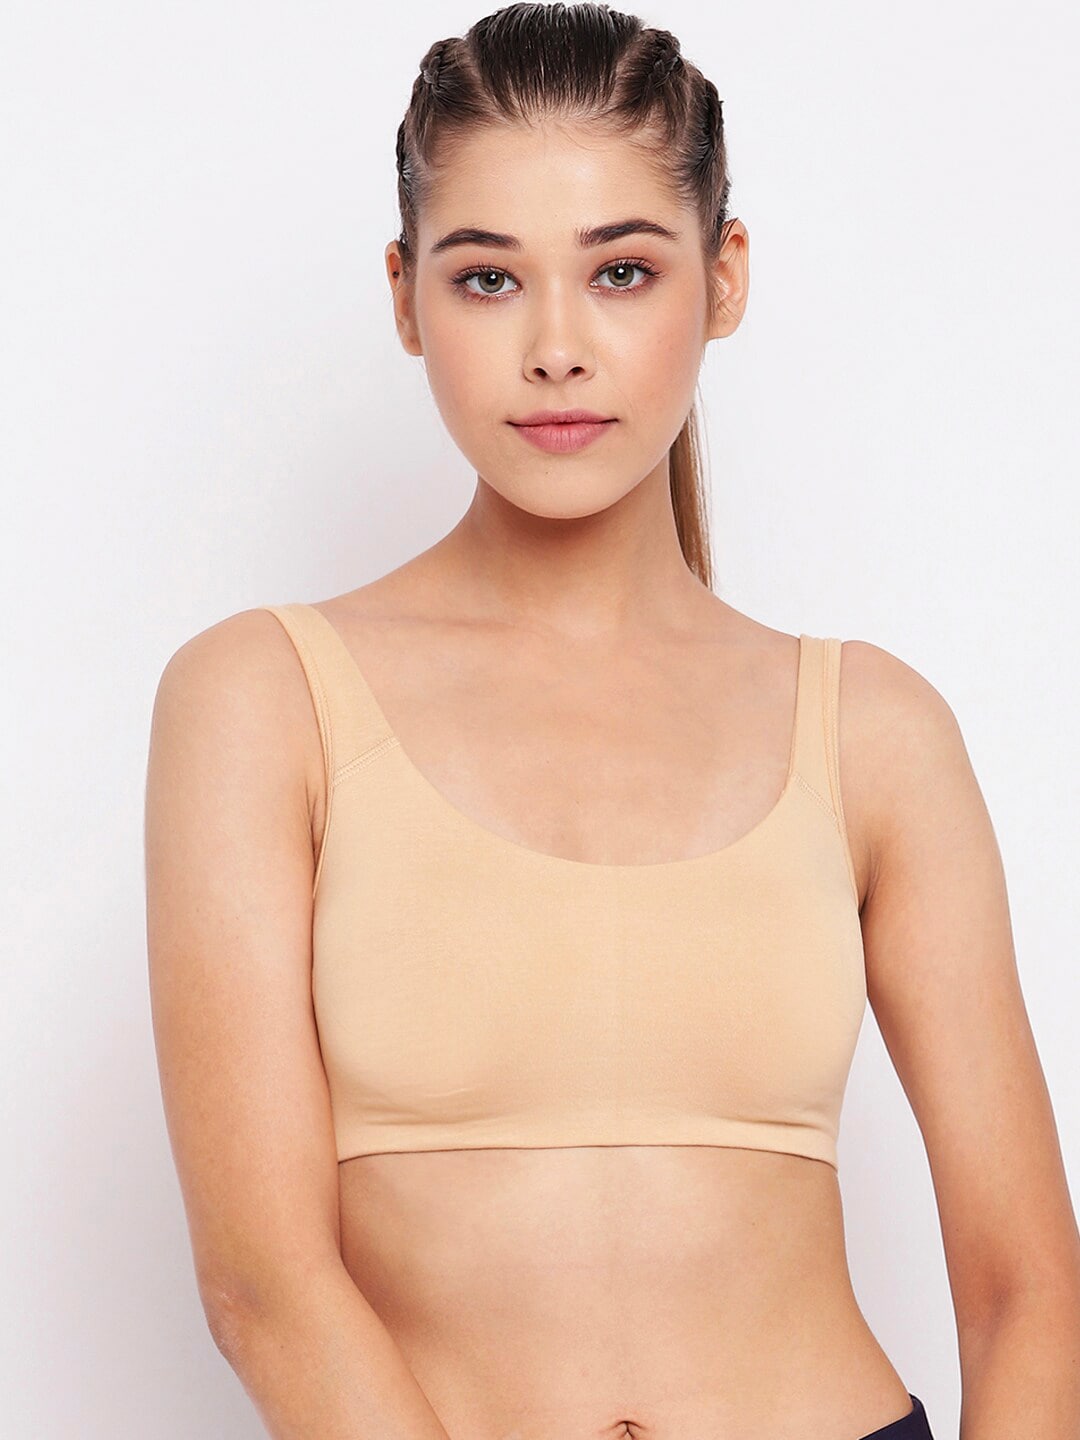 Enamor Beige Non-Wired Non Padded Full Coverage Low Impact Slip on Sports Bra SB06 Price in India